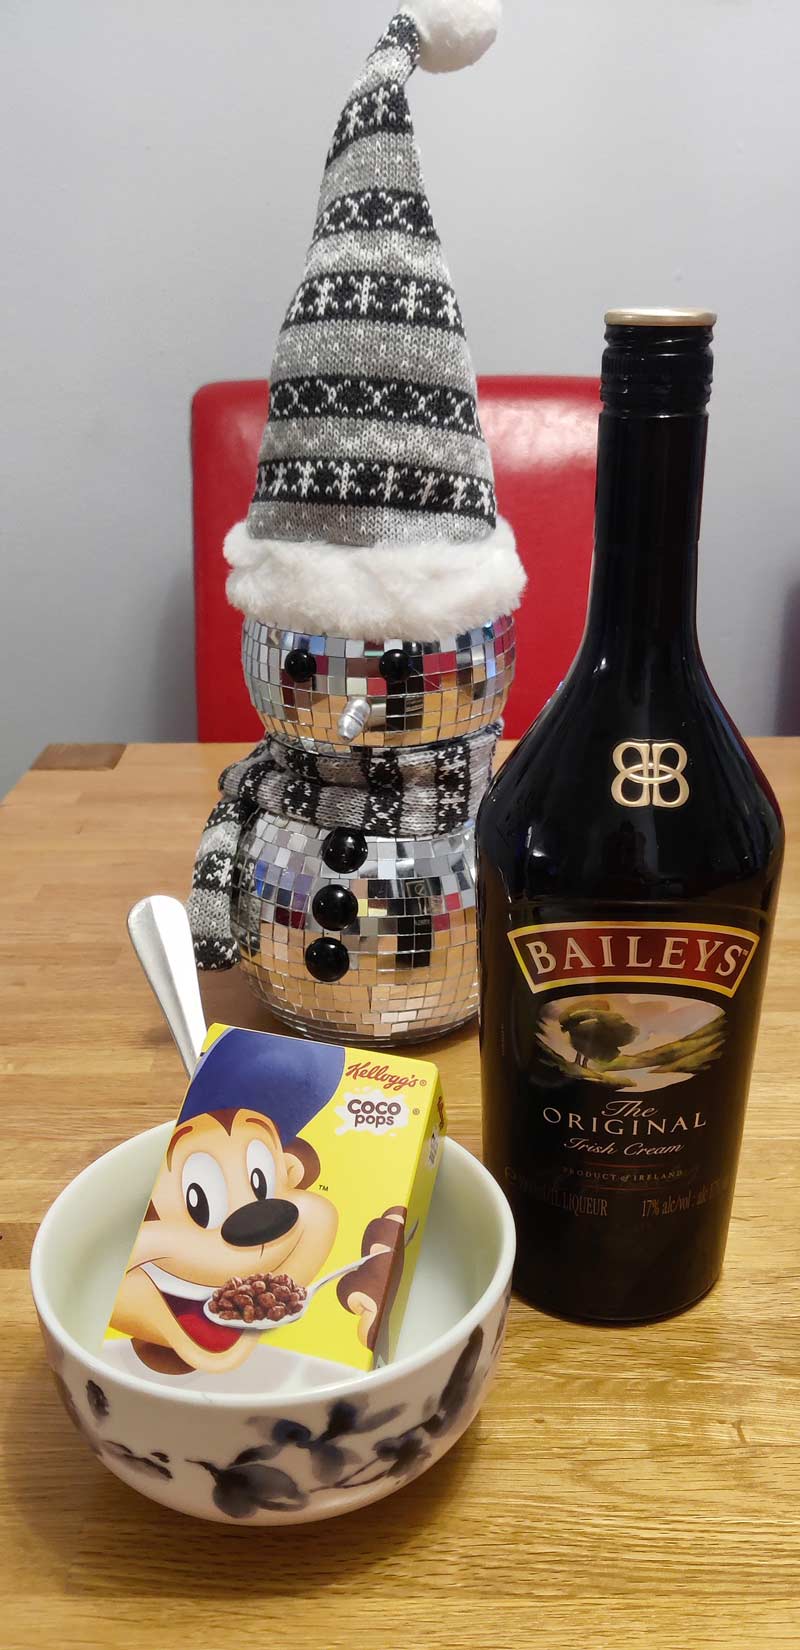 Looking forward to a traditional Christmas day breakfast